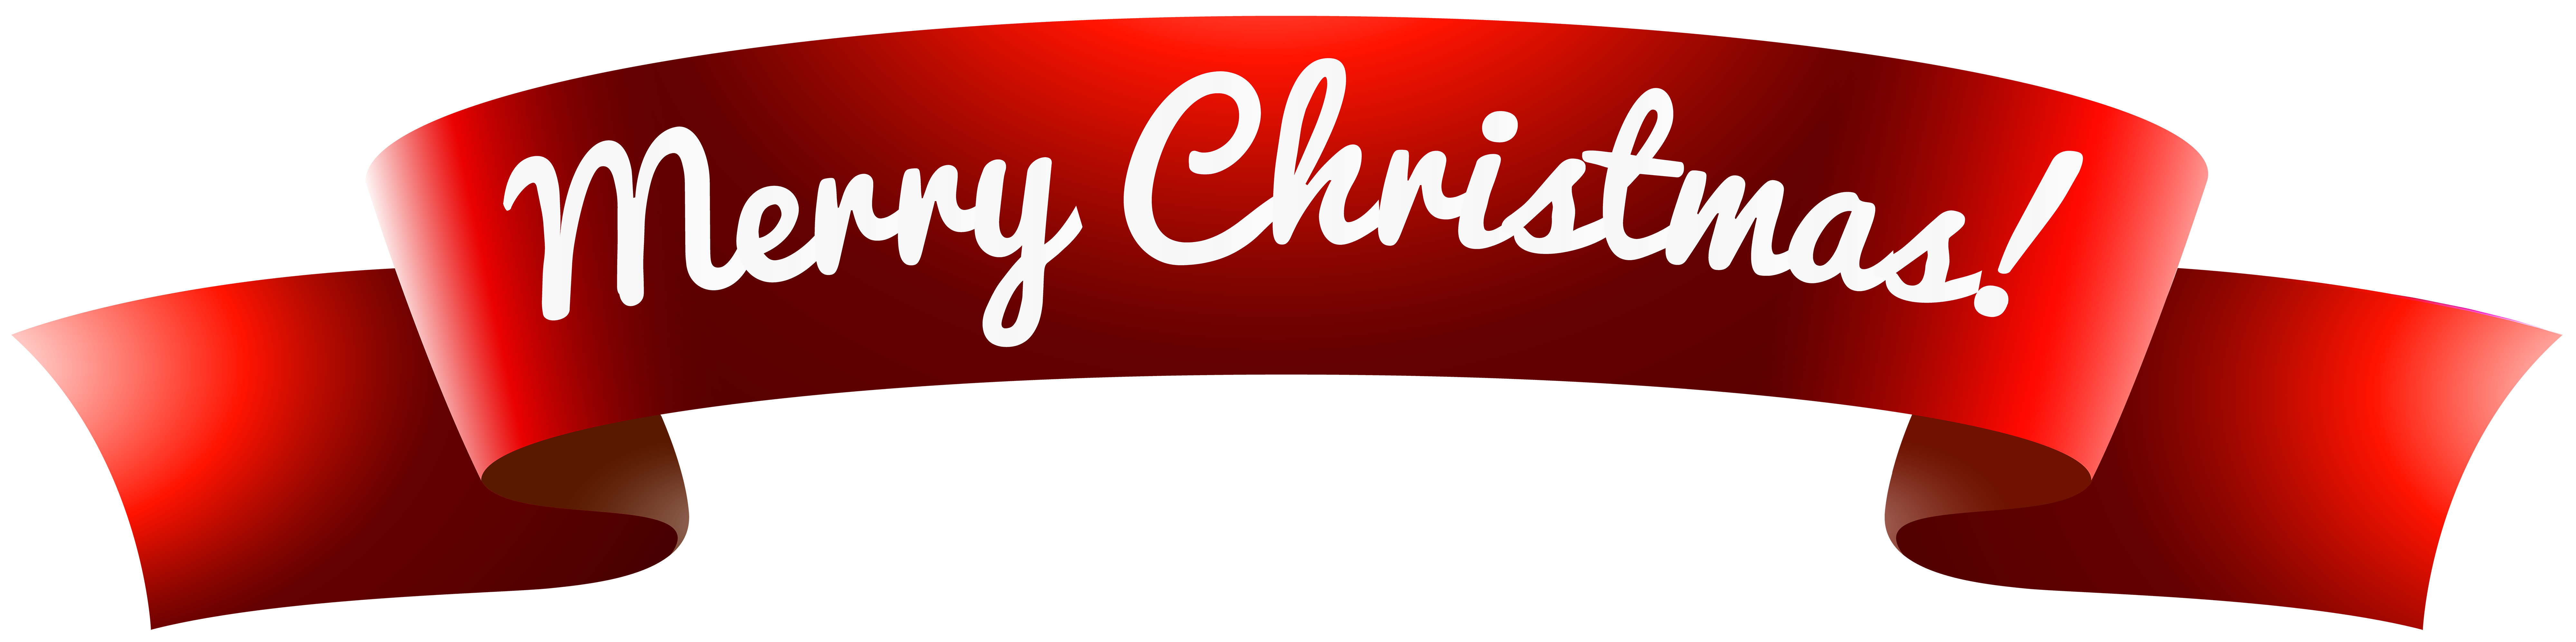 banner-merry-christmas-png-clip-art-image-gallery-yopriceville-high-quality-free-images-and